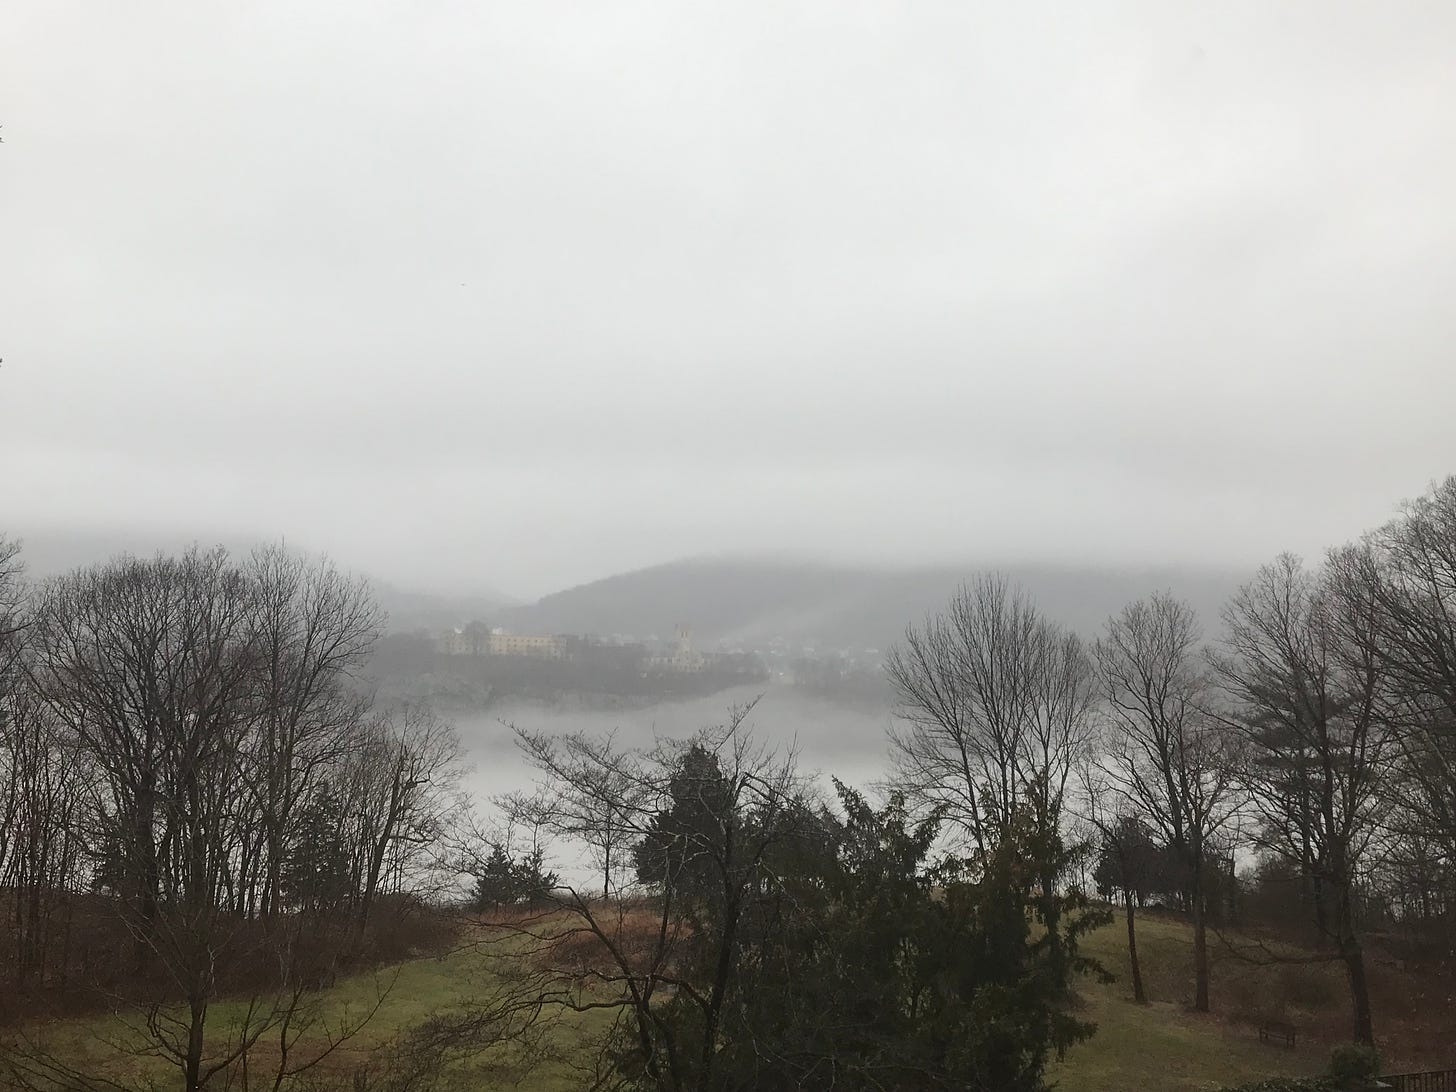 A view of the Hudson river half-obscured by mists. In the foreground are bare winter trees, and across the river are blurred hills.